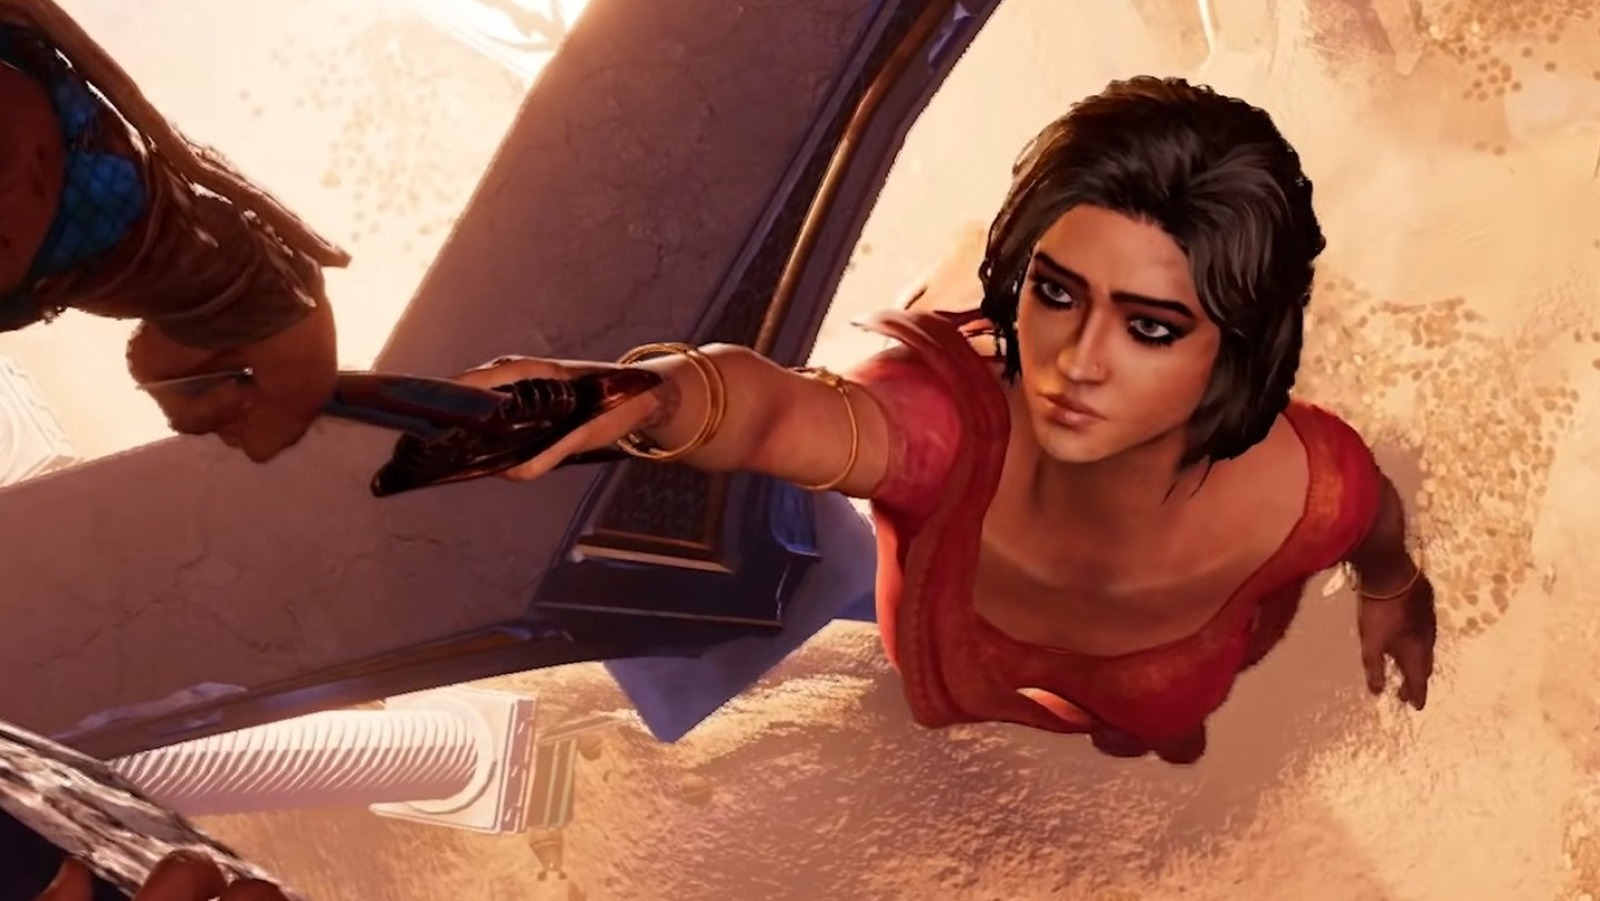 The Prince Of Persia: Sands Of Time remake isn't cancelled, but